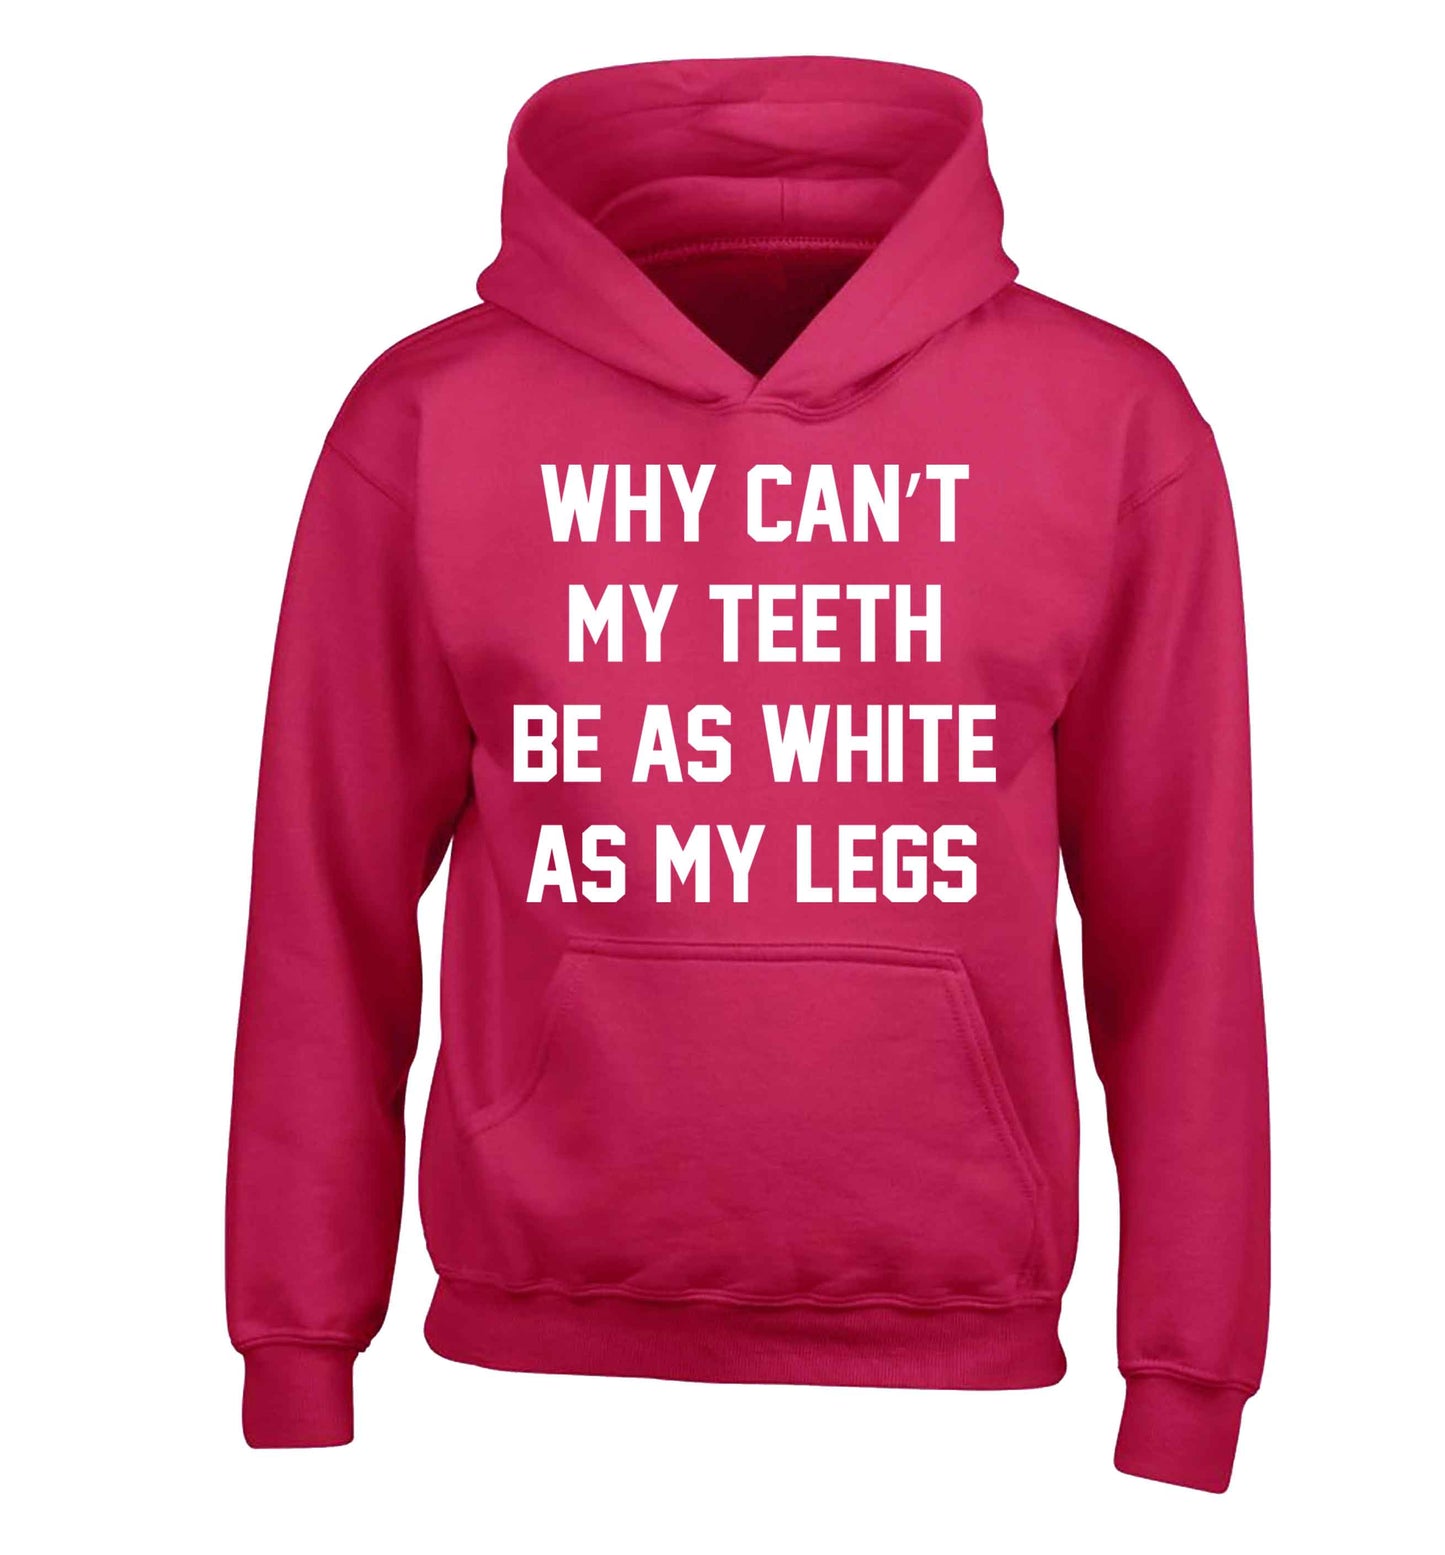 Why can't my teeth be as white as my legs children's pink hoodie 12-13 Years